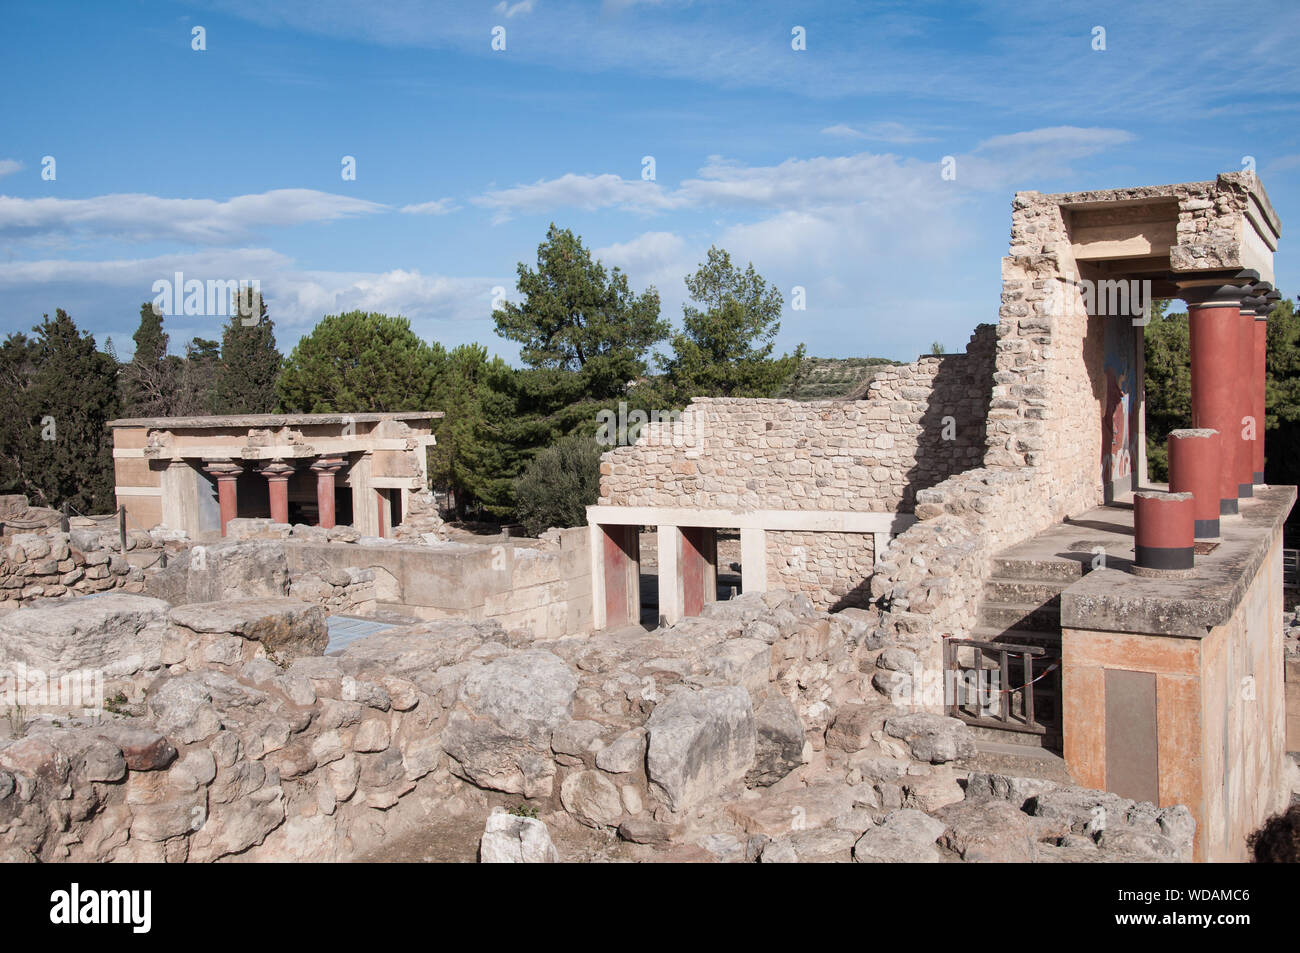 Some of the ancient ruins of the Minoan civilisation at Knossos in Crete Stock Photo